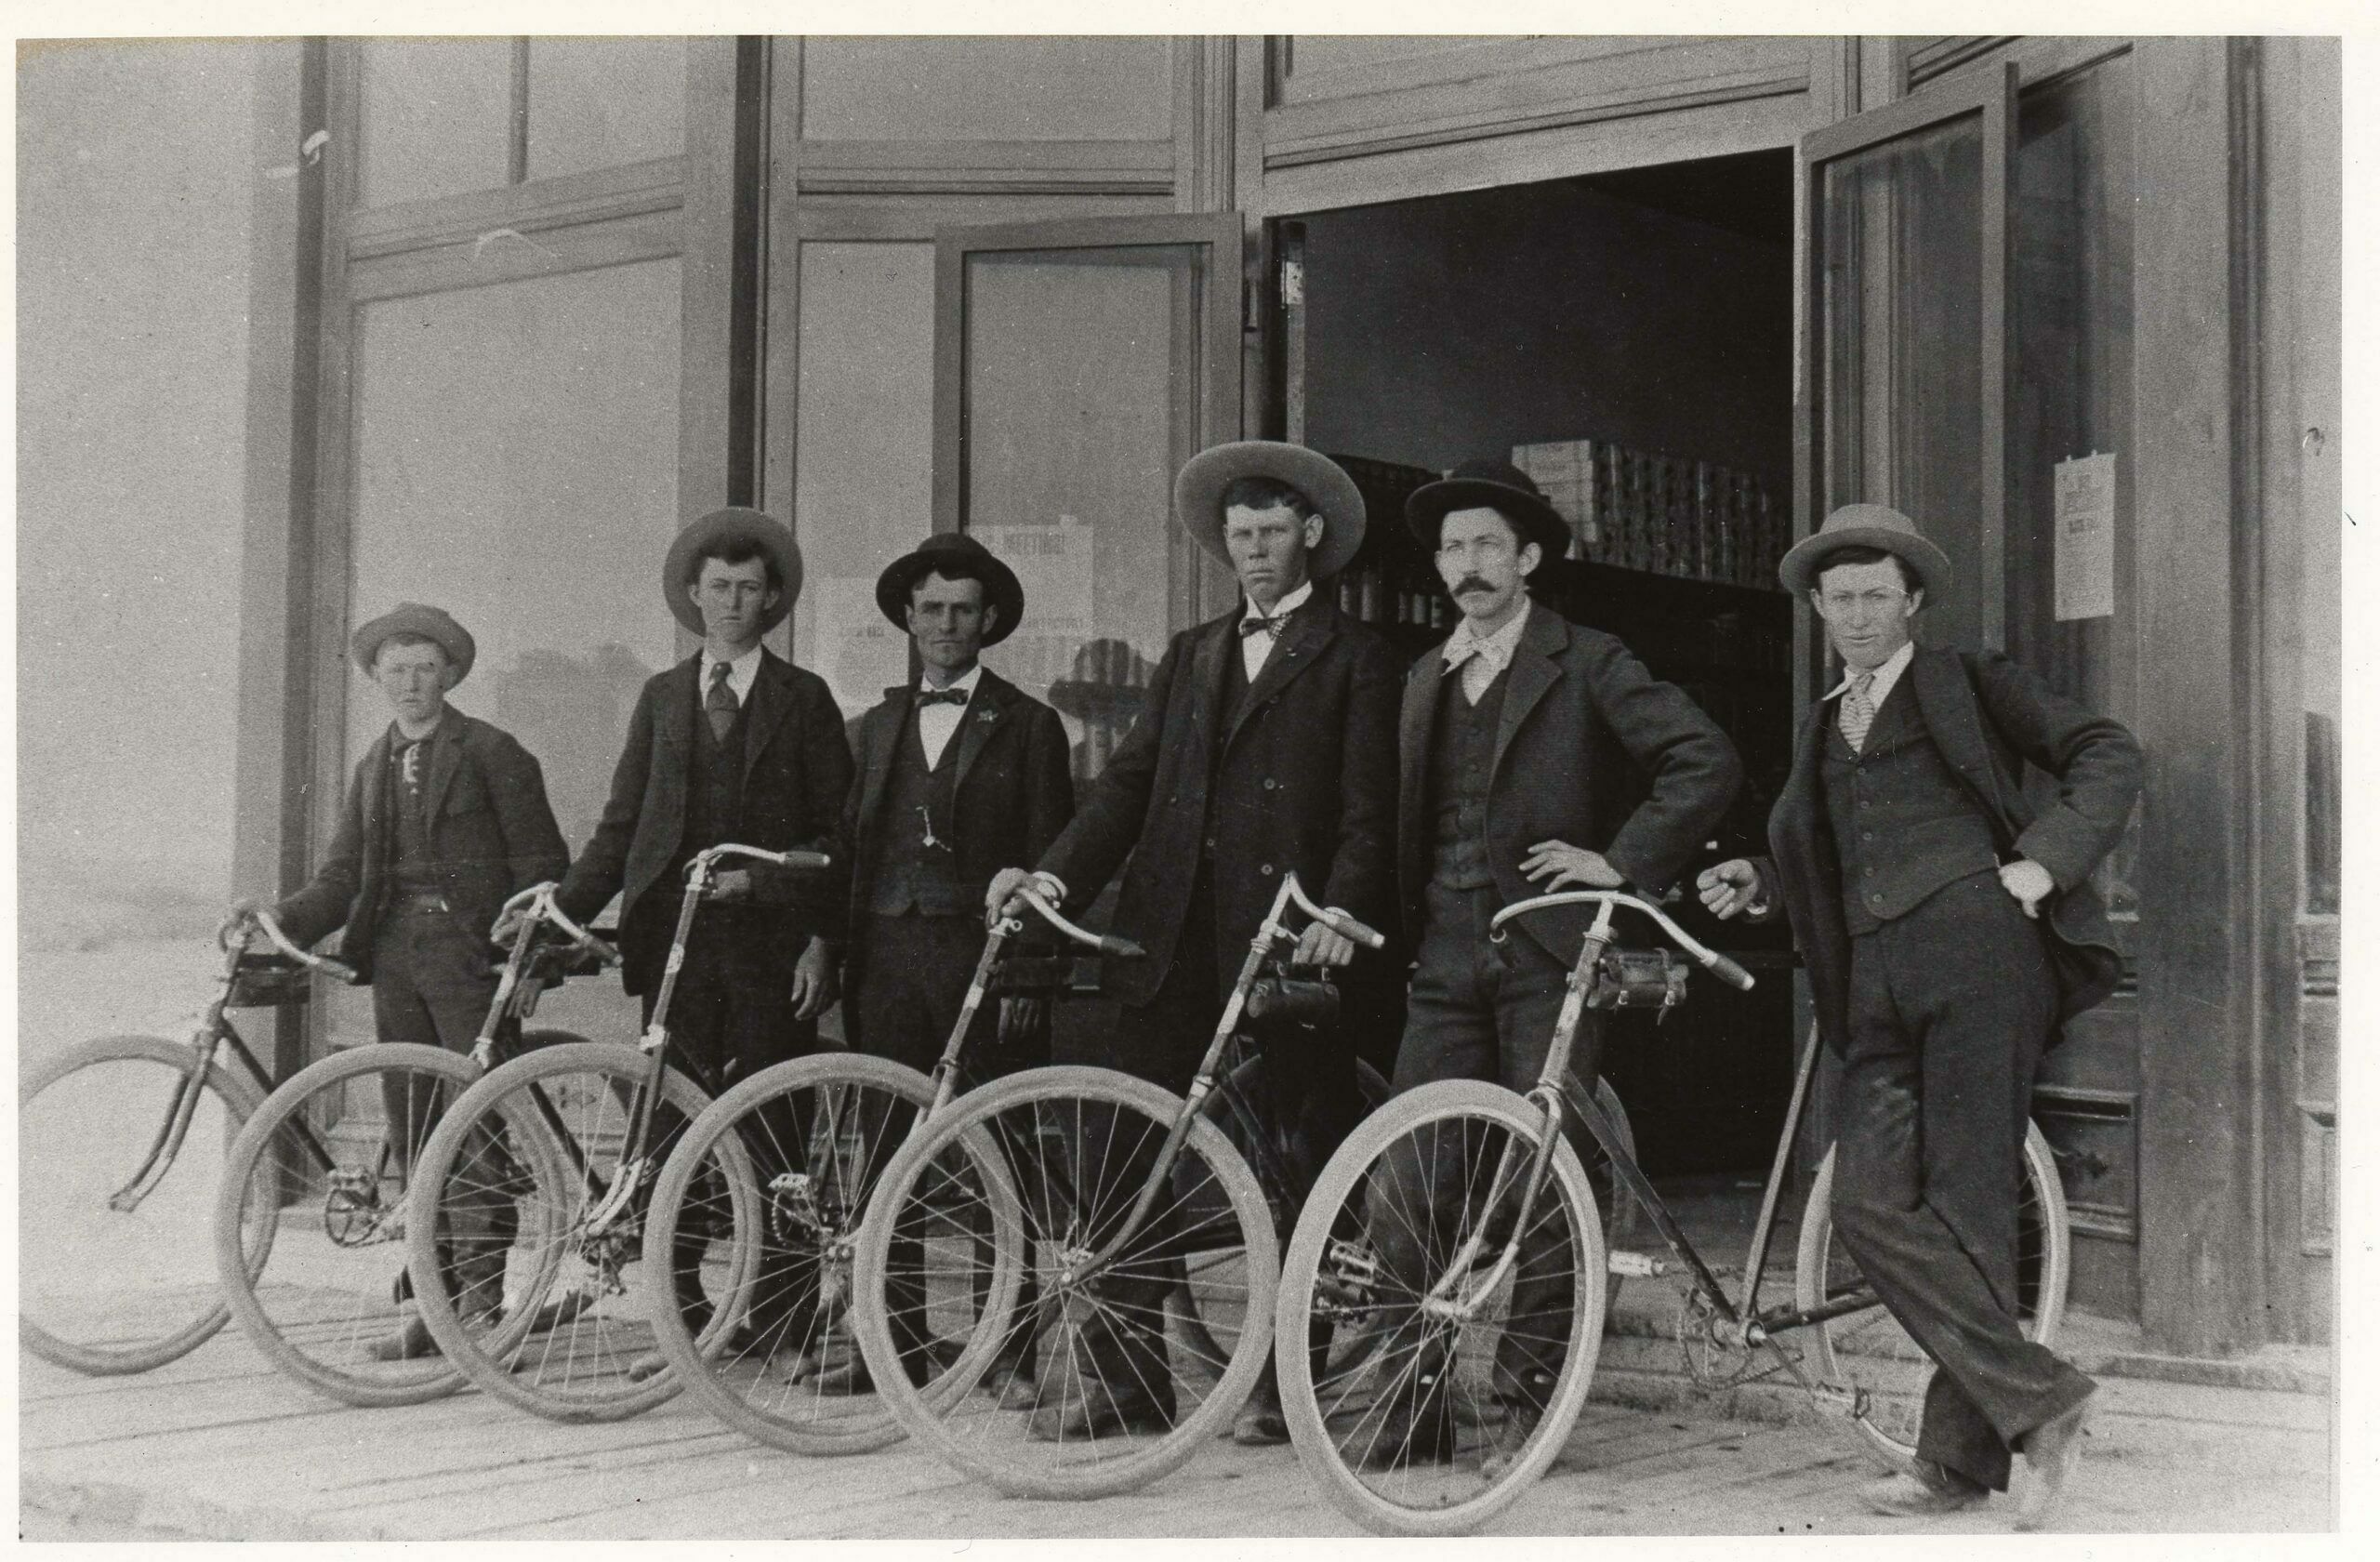 Young men took to bicycles in the early 1890’s like they do to cars and pickup trucks today. As with bicyclists today, the clothing had to fit the sport, and it was suits, ties, hats and vests – Sunday finery. Most were equally comfortable on these “safety” bikes or on the high-wheel “ordinaries.” They formed riding clubs, held a variety of endurance and short distance contests, and sometimes managed to rub parents and law officers the wrong way with their speed and crazy antics. This photo was taken in front of the I.O.O.F. Hall, Phil Bogler is third from the left.  (1)